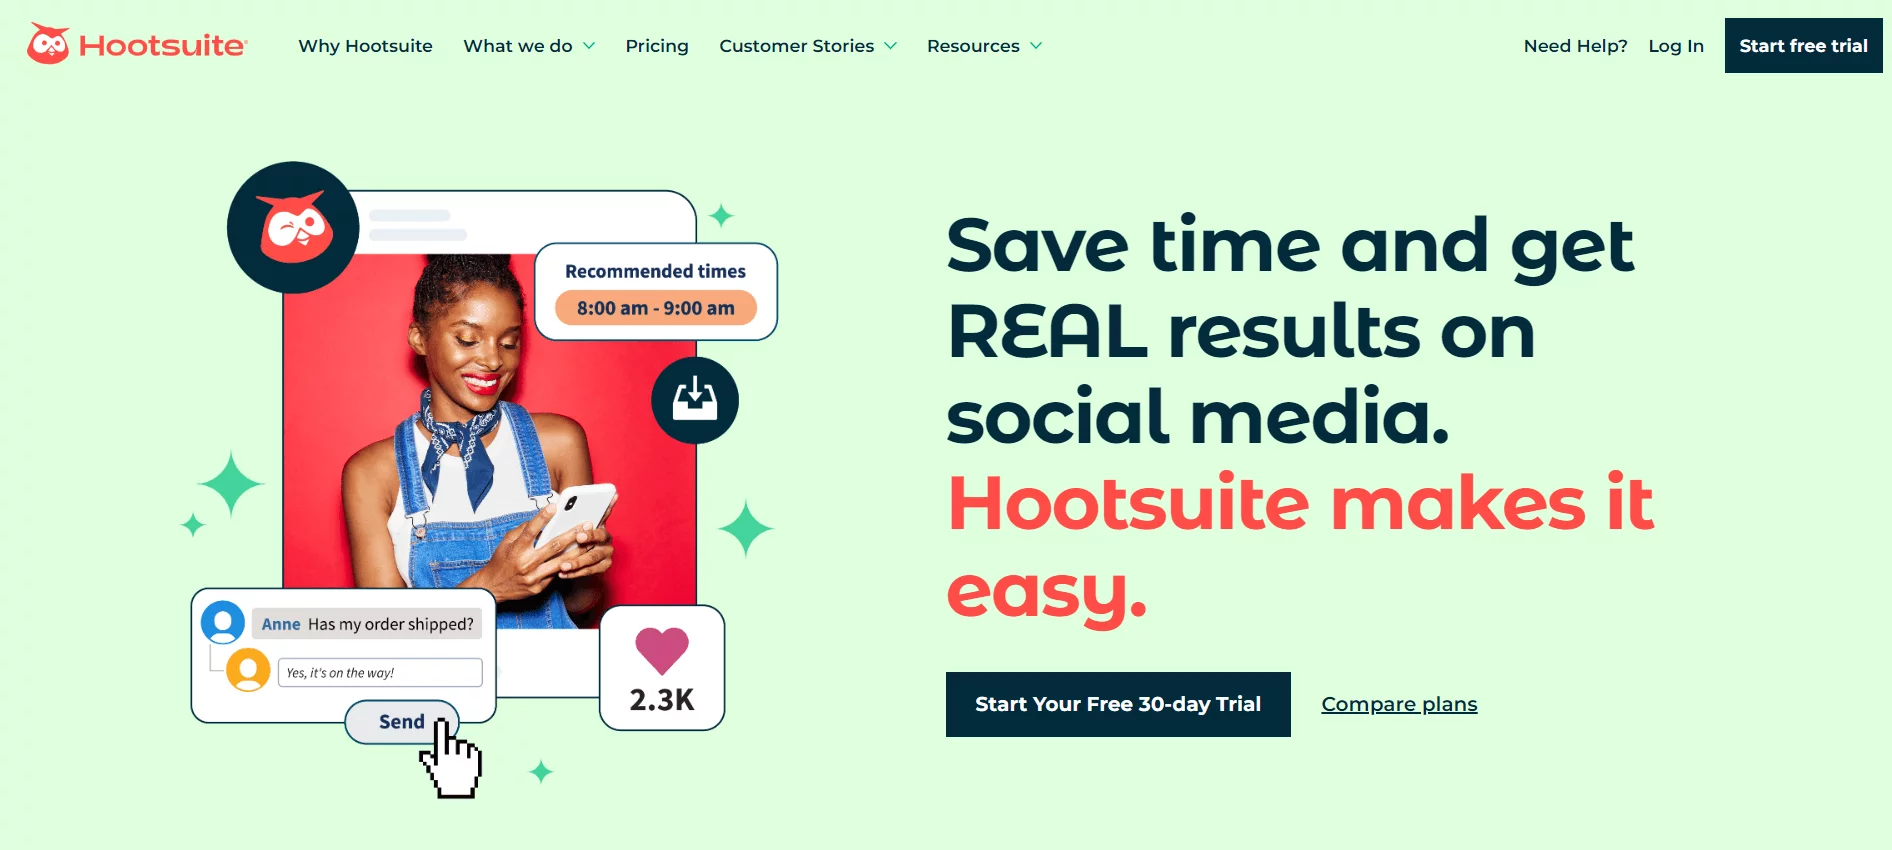 Hootsuite's green home page on their website